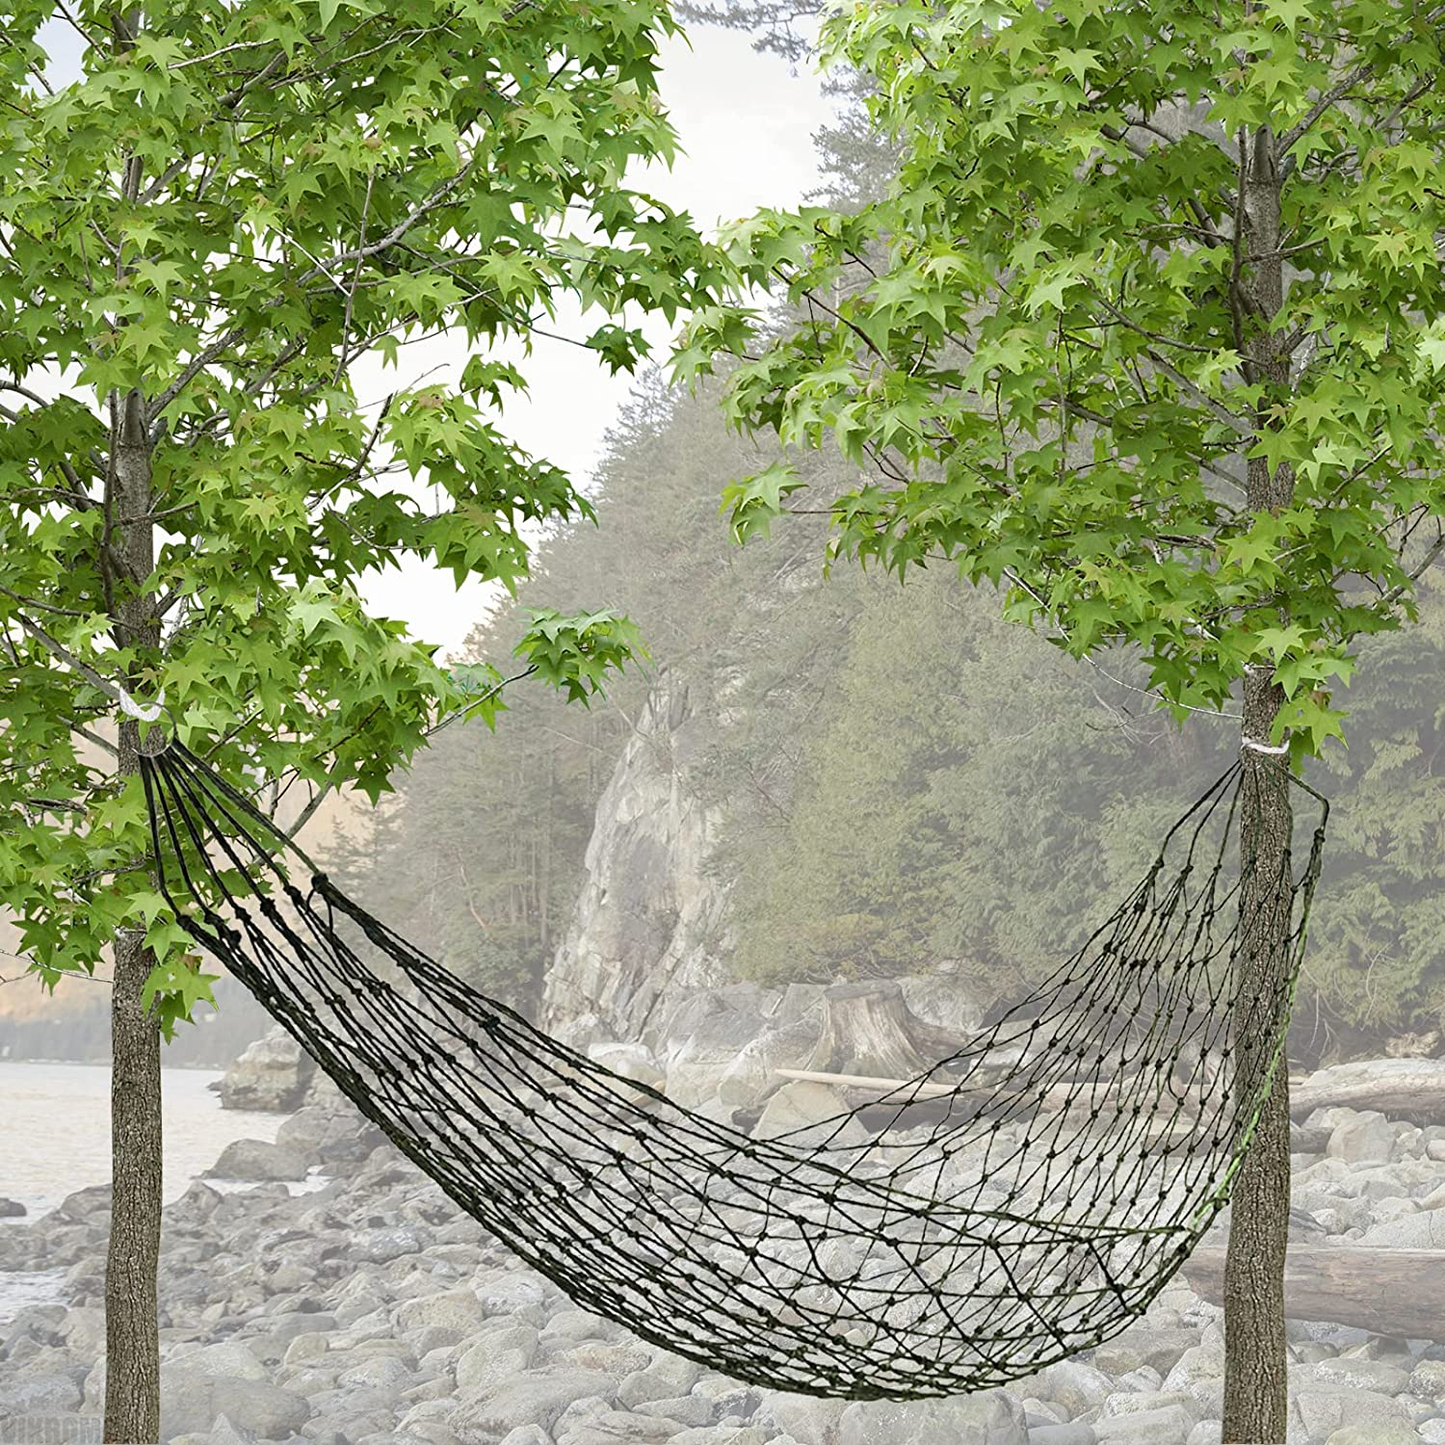 Mesh Rope Hammocks for outside - Sleeping Hammock Nylon Camping - Hammock Large Weight Limit Swing Mesh Hammock - Large Hammocks for outside Nylon Hammocks for Trees for Hiking